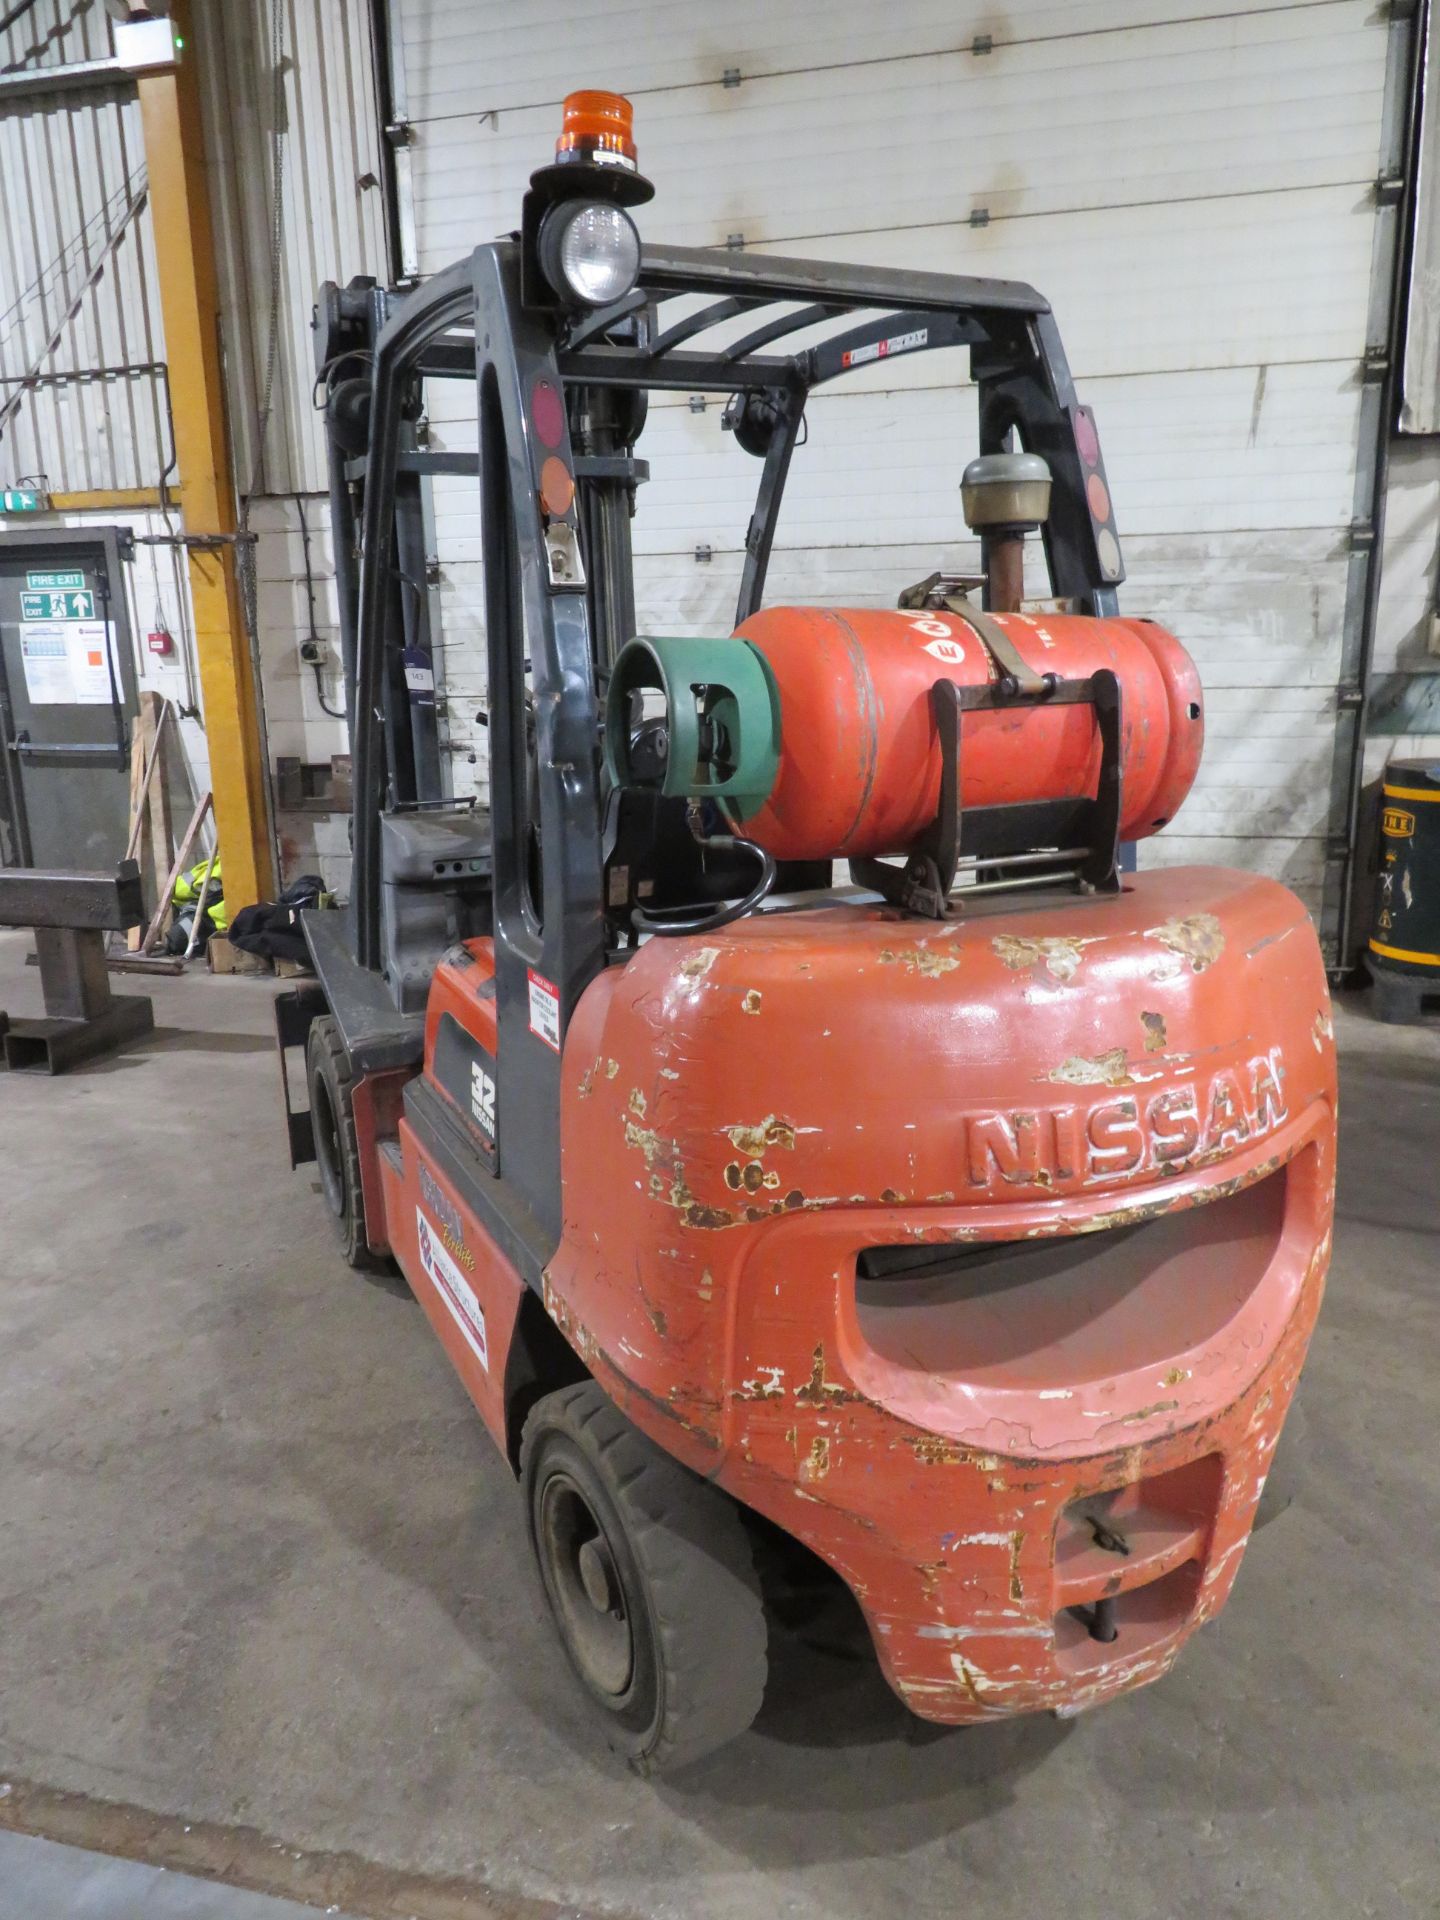 Nissan 32. Model UODO278000, gas operated fork truck with side shift, YOM 2006, hours 8559.4 - Image 4 of 6